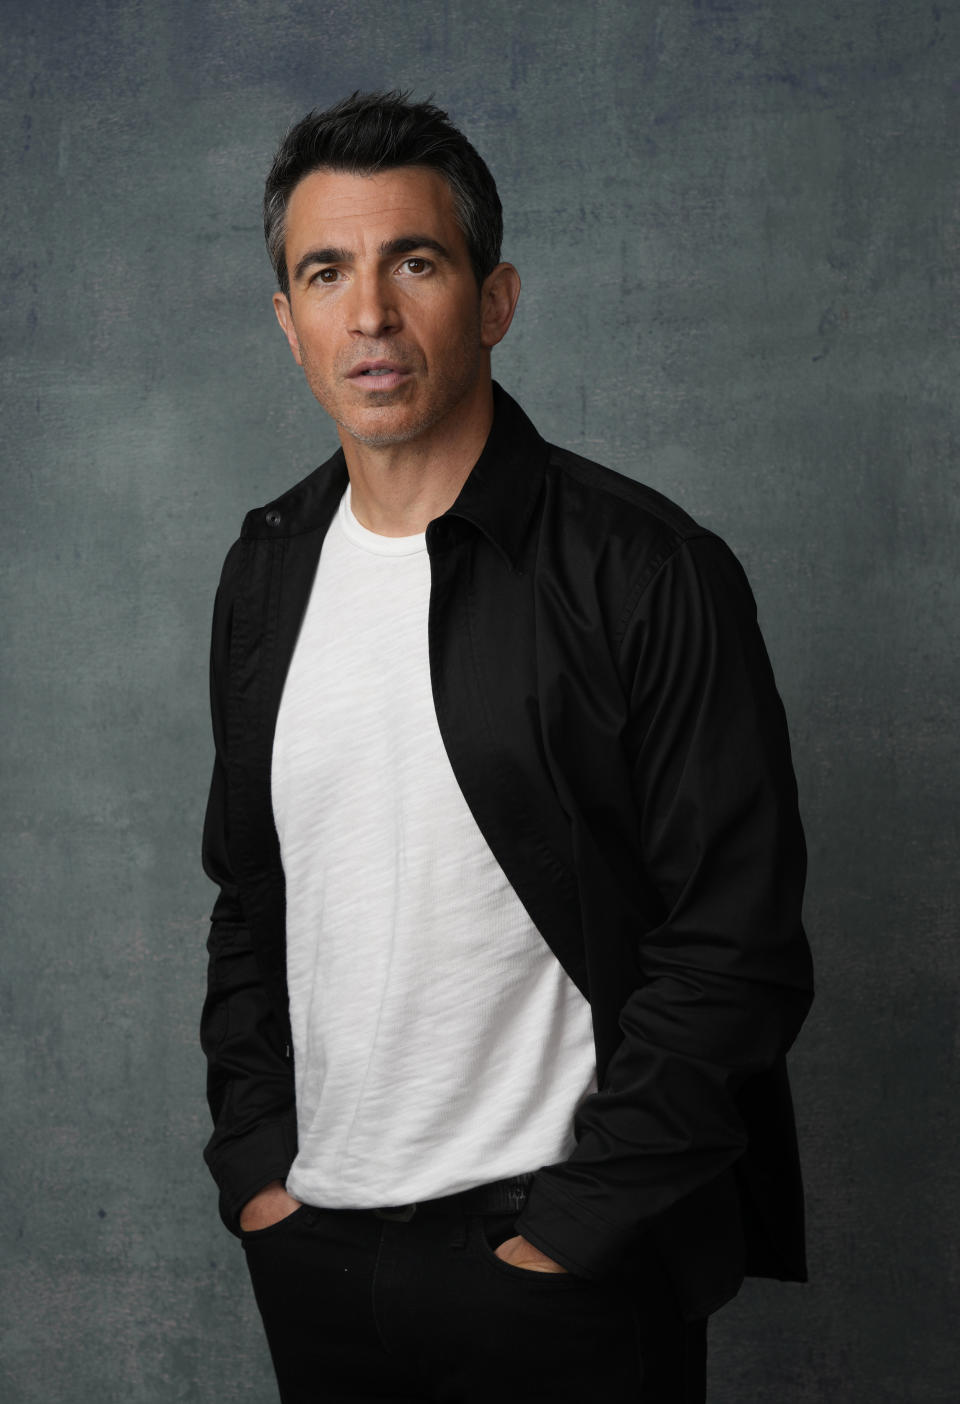 Chris Messina, a cast member in the Peacock series "Based on a True Story," poses for a portrait, Wednesday, May 24, 2023, at the London Hotel in West Hollywood, Calif. (AP Photo/Chris Pizzello)